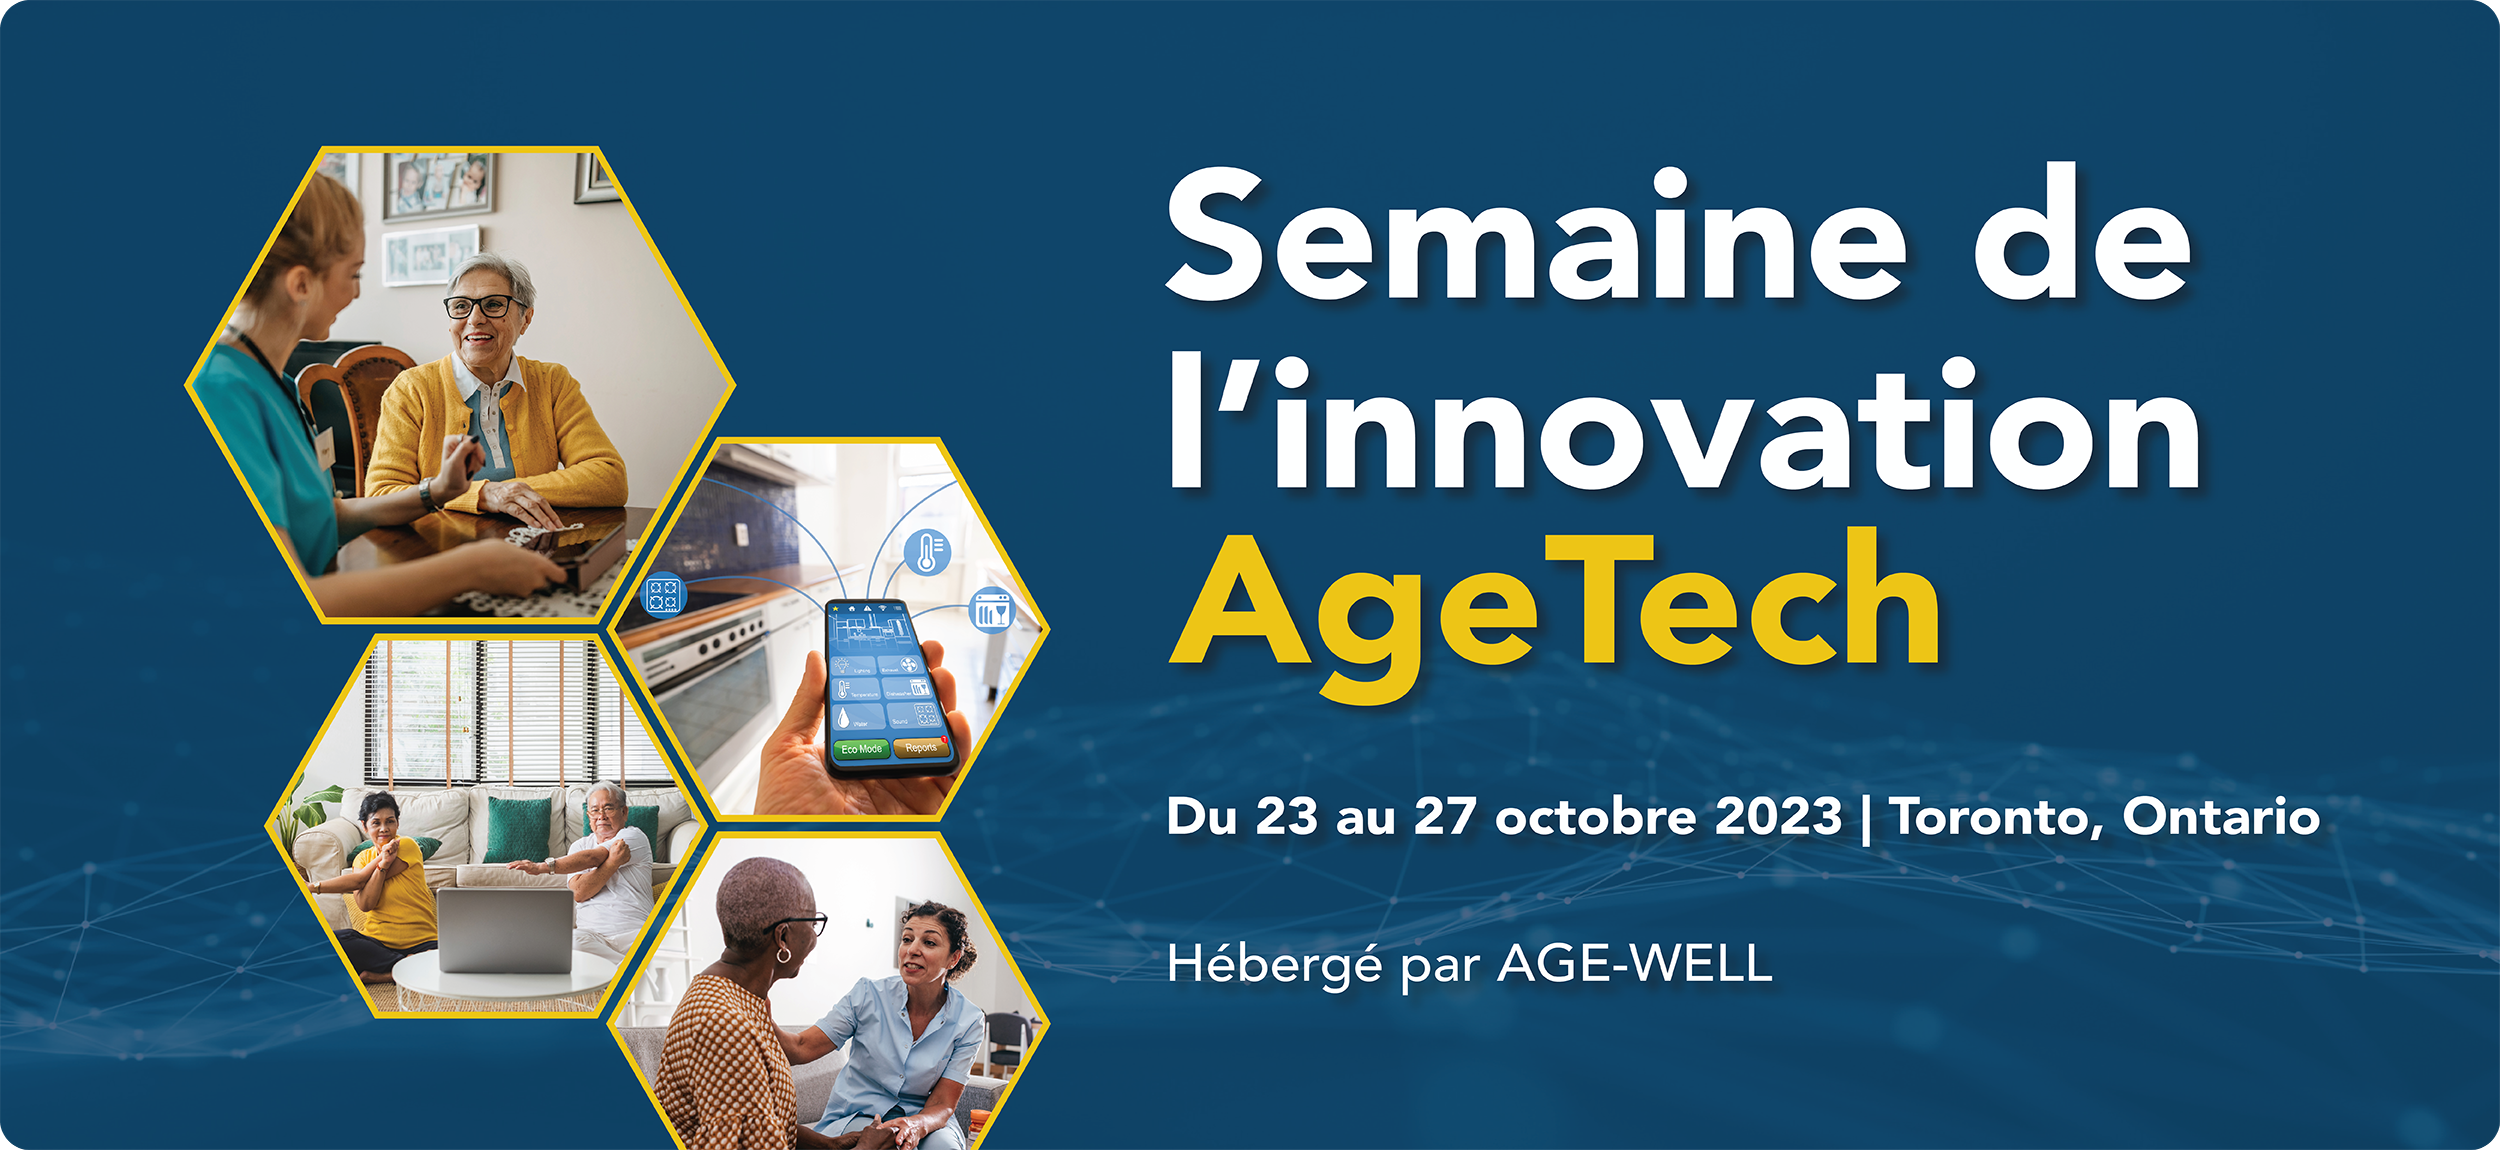 AgeTech Innovation Week – The premiere event for technology and